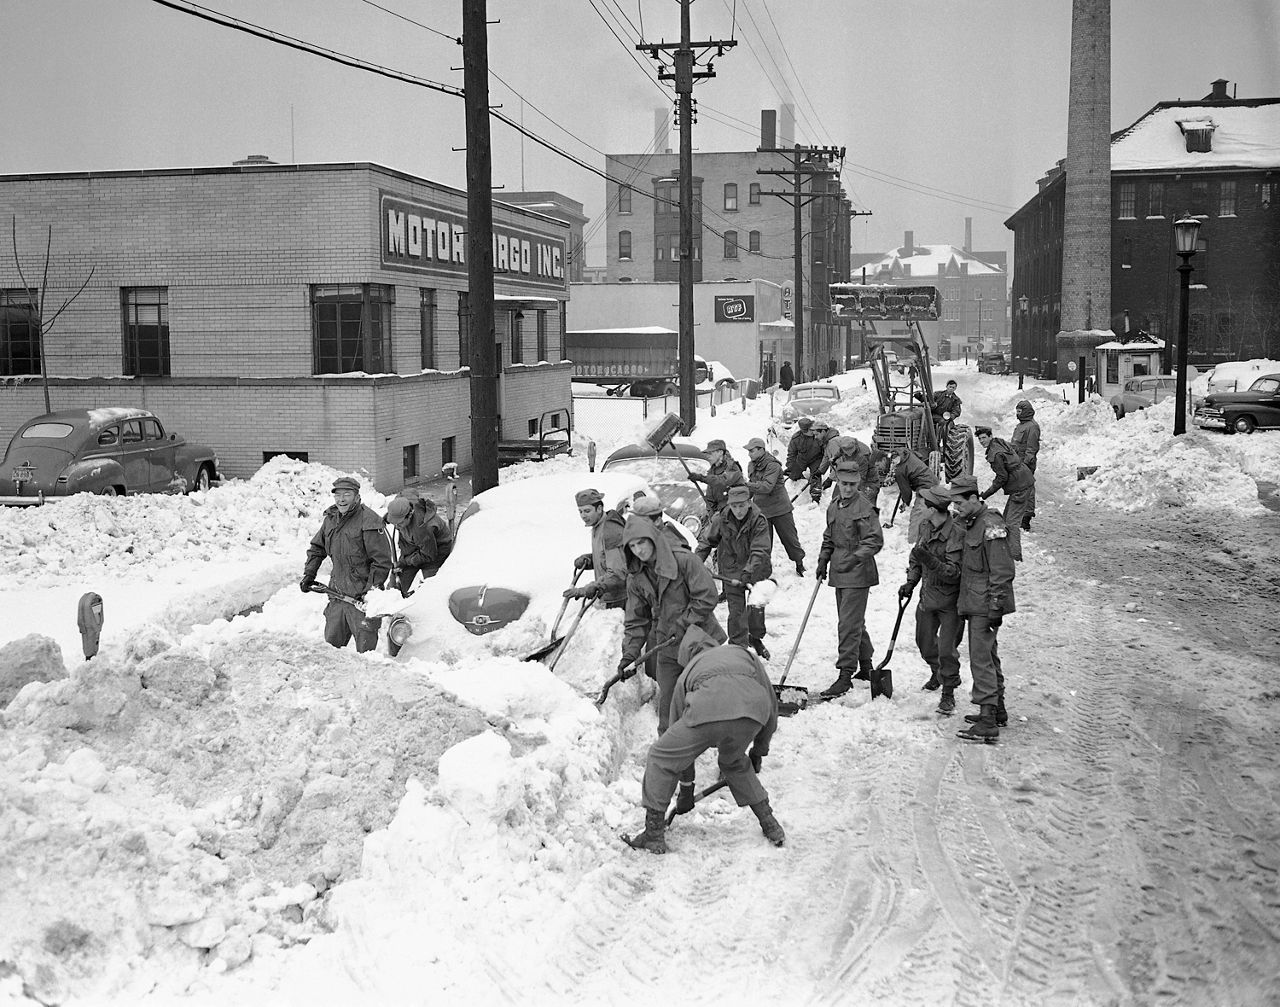 Units of the 112th engineers of the Ohio National Guard use shovels to help free snow bound streets of Cleveland, Ohio, November 28, 1950. Weekend storm caused one of worst traffic jams in Cleveland's history. (AP Photo)